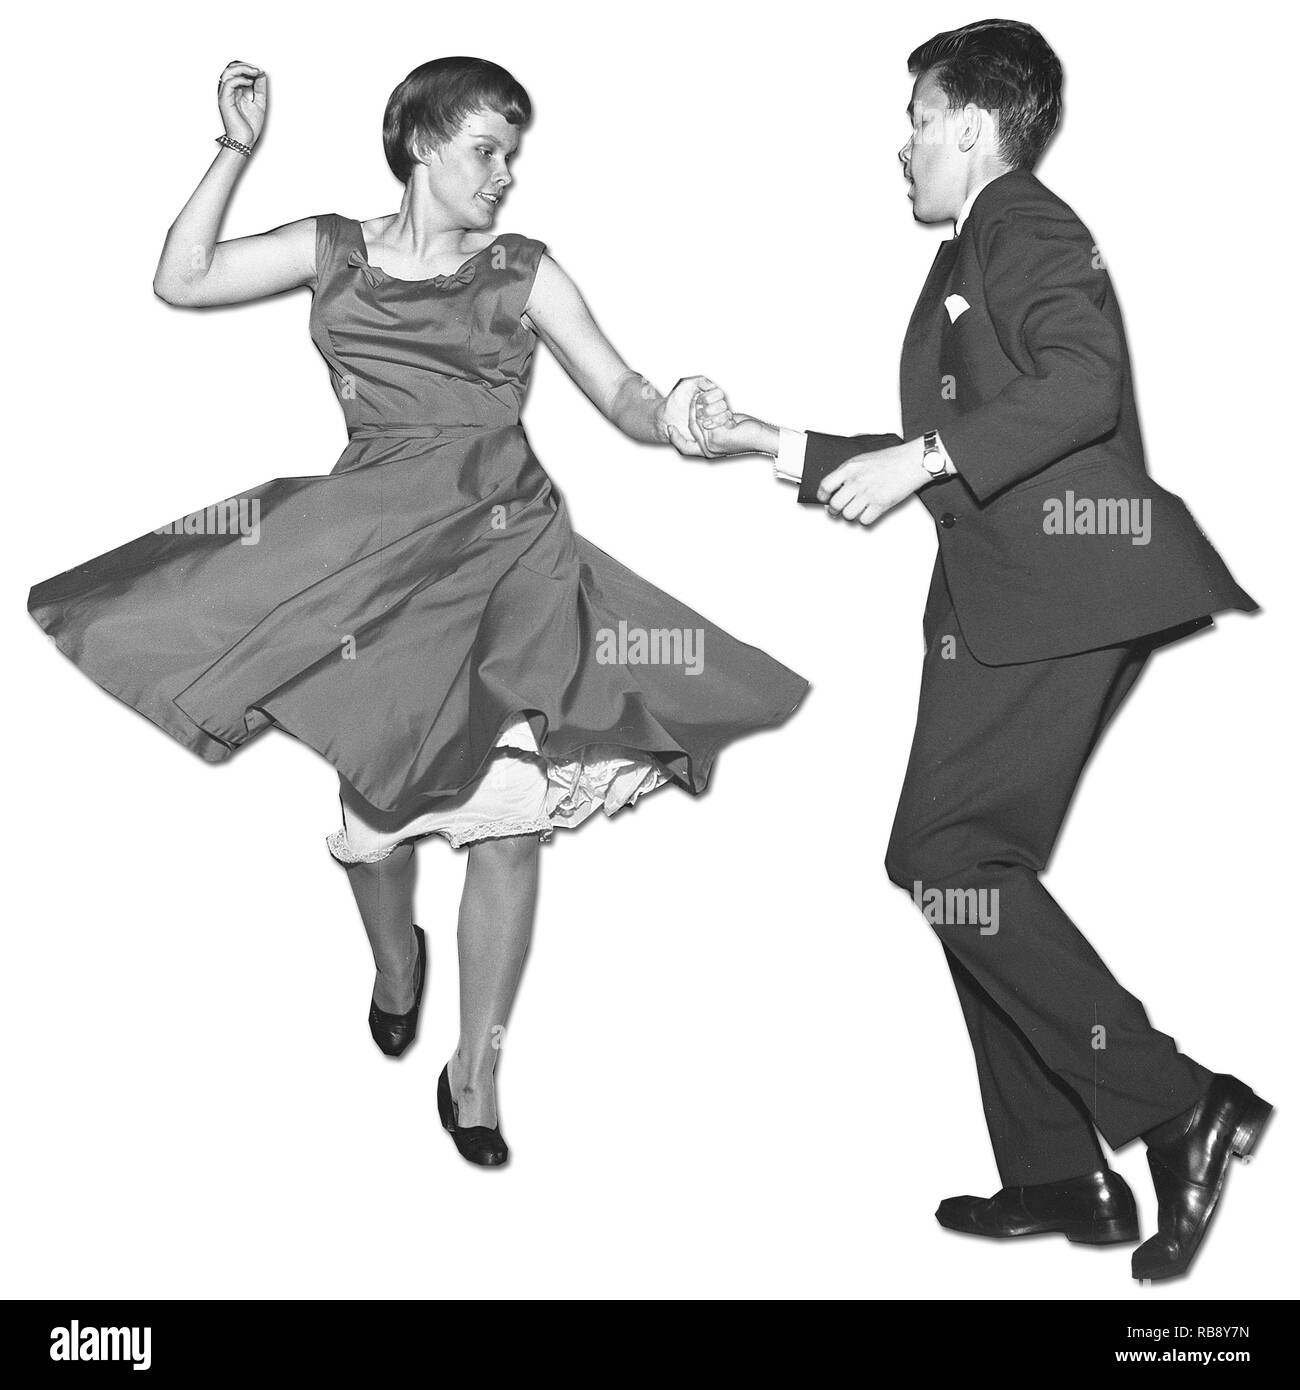 Dancing in the 1950s. A young couple is dancing and moving to the music. Sweden Photo Kristoffersson.  Ref CC22-8 Stock Photo